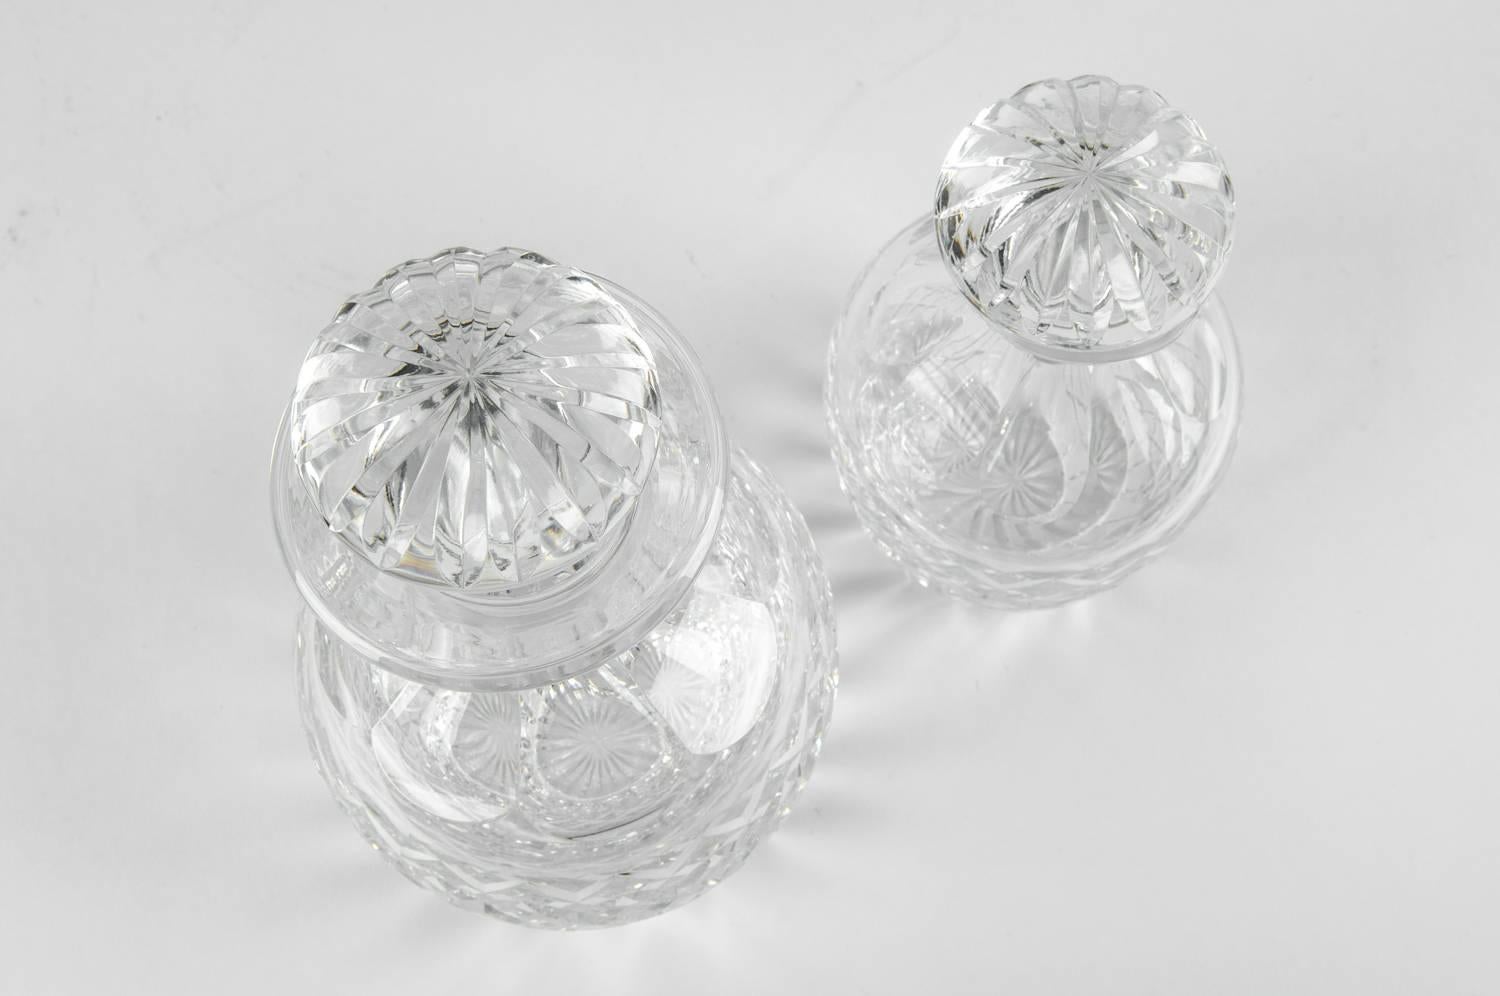 Cartier cut crystal barware pair of decanter. Each decanter is in excellent condition. Maker's mark undersigned on each one. Each decanter stopper is numbered .The taller measure about 9 inches high x 5 inches diameter. The smaller decanter measure